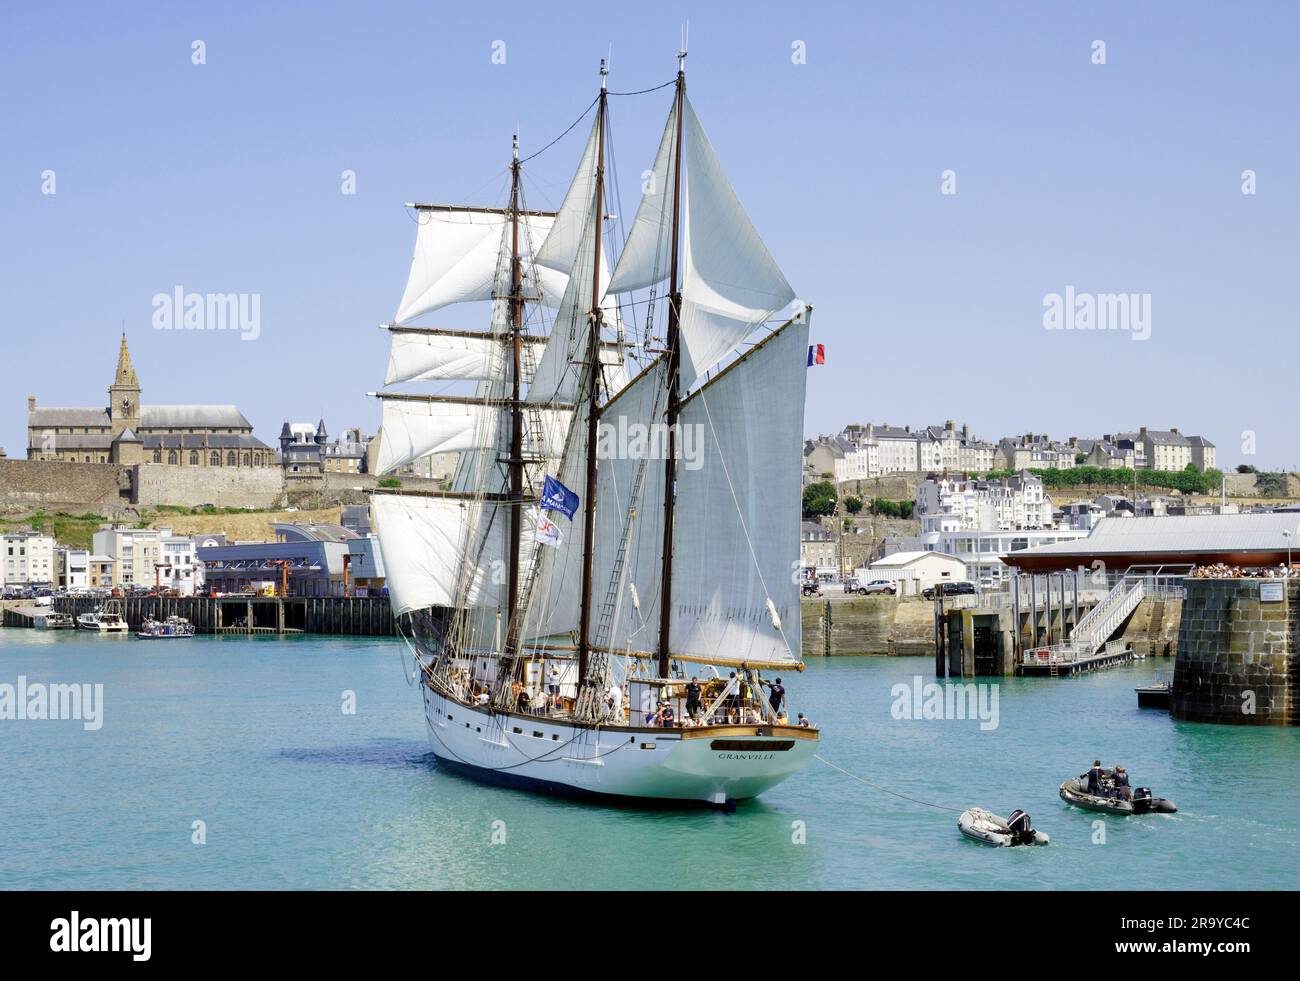 The schooner Marité in front of Granville harbour entrance. Celebration of the centenary of the schooner Marité in Granville. Manche, Normandy, France. Stock Photo